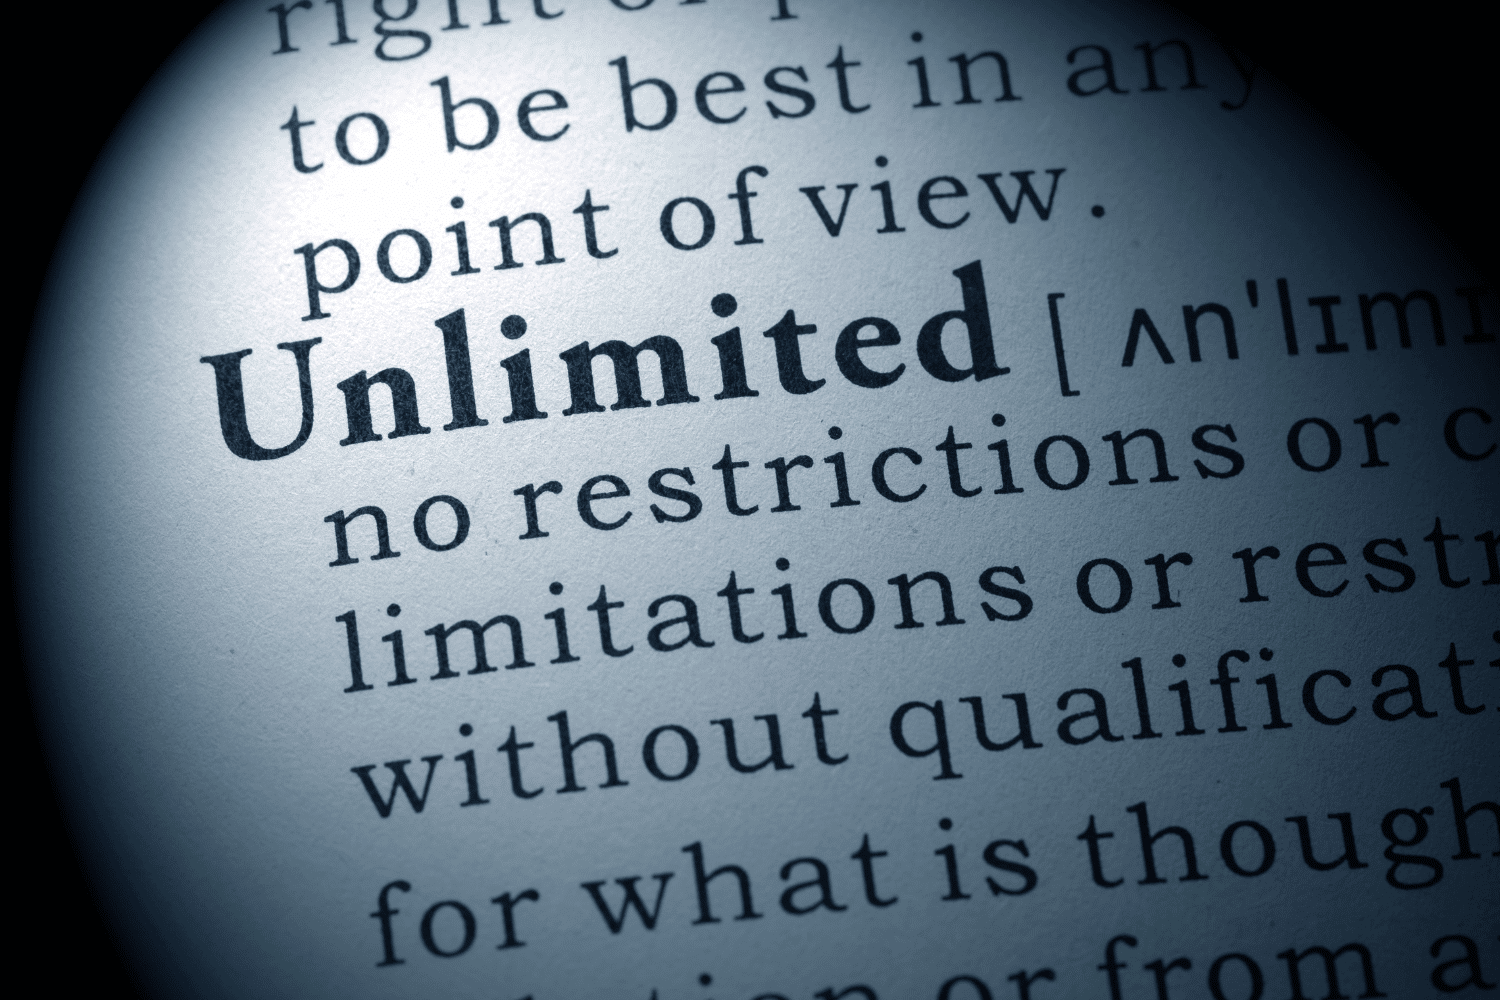 dictionary page showing part of the definition of the word "unlimited"